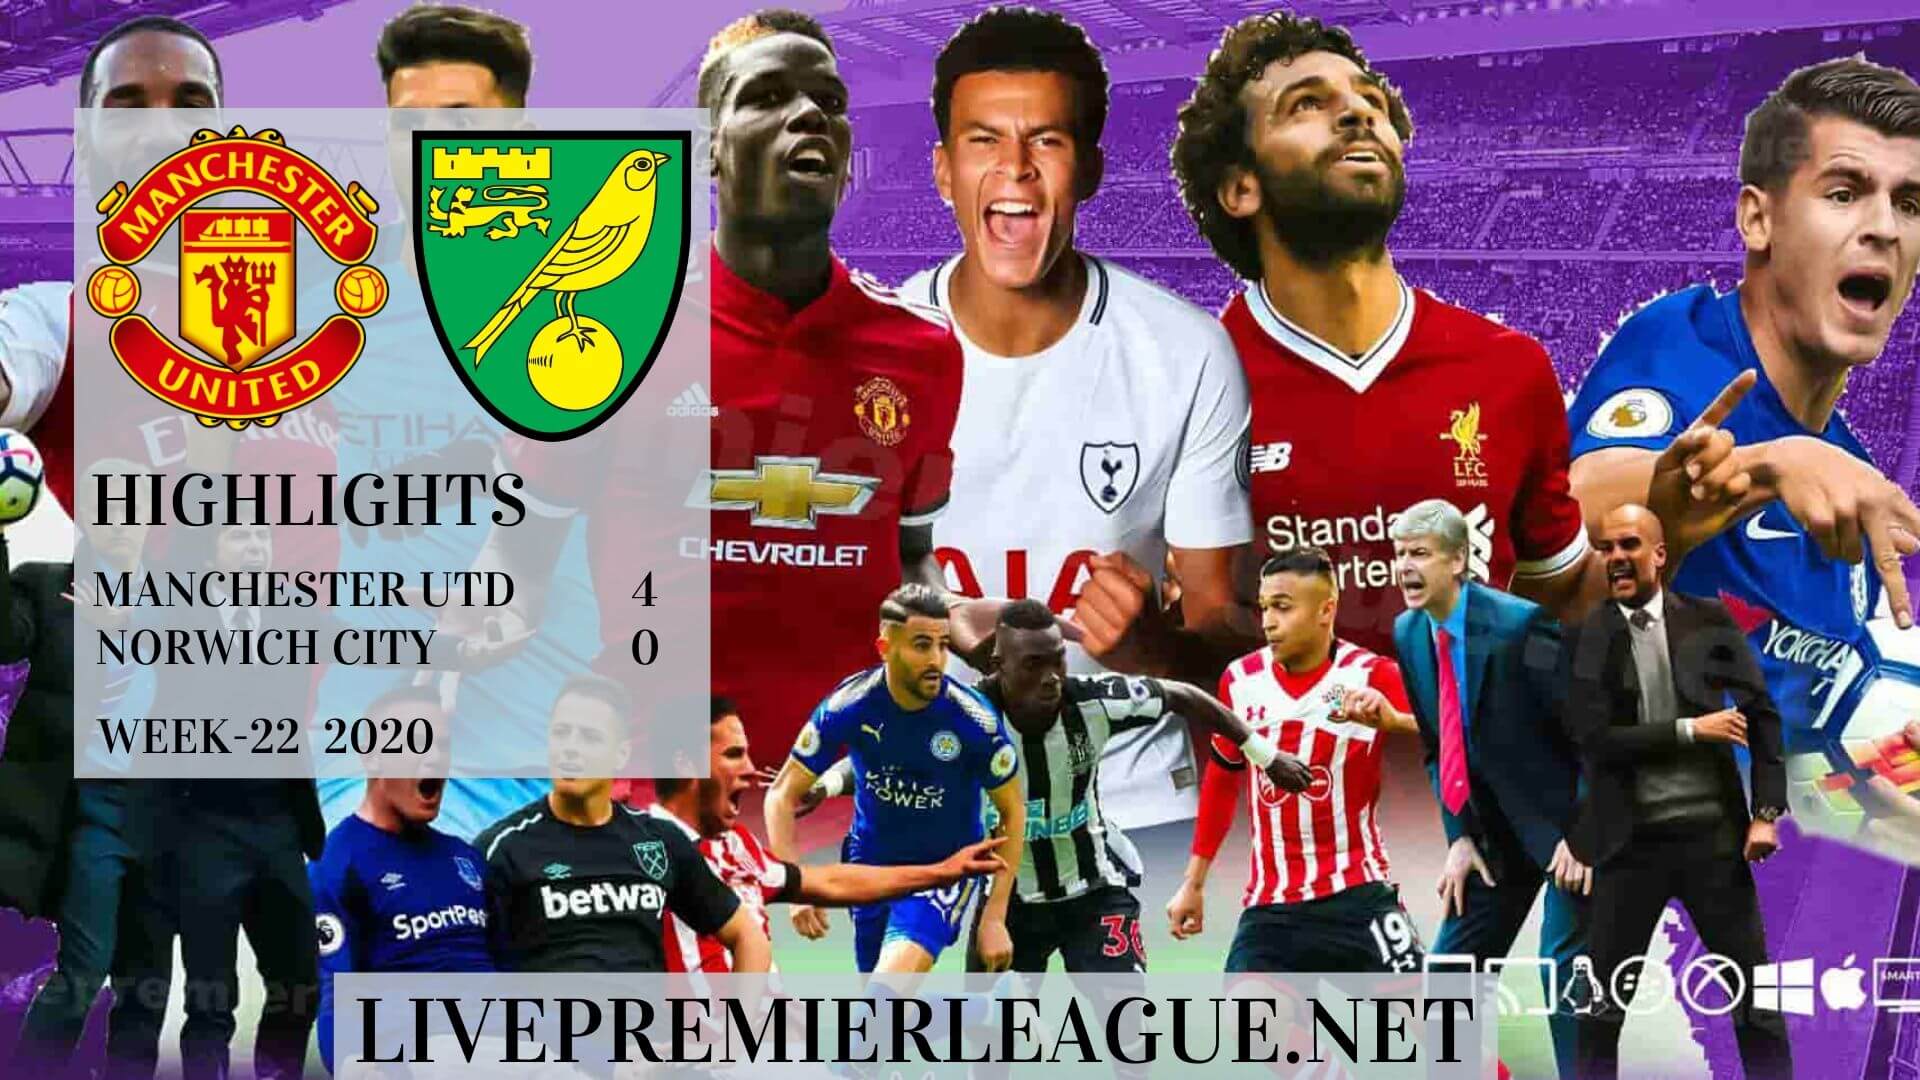 Manchester United Vs Norwich City Highlights 2020 Week 22